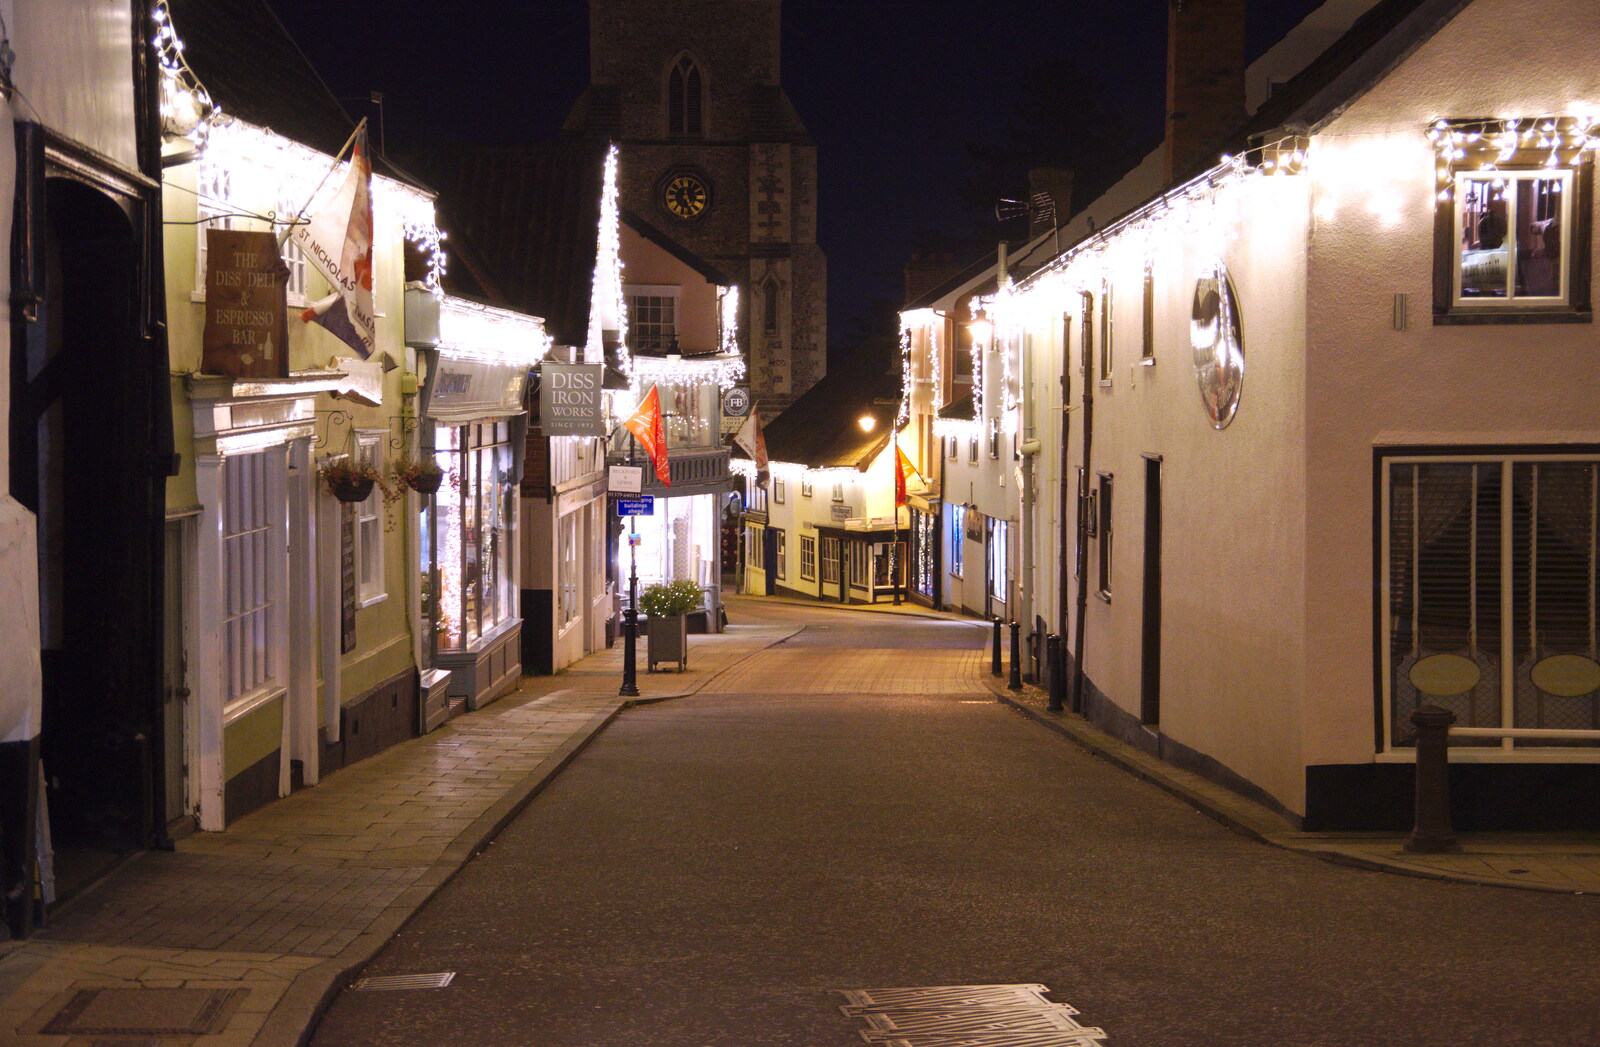 The spangly lights of St. Nicholas Street from Diss Panto and the Christmas Lights, Diss, Norfolk - 27th December 2019